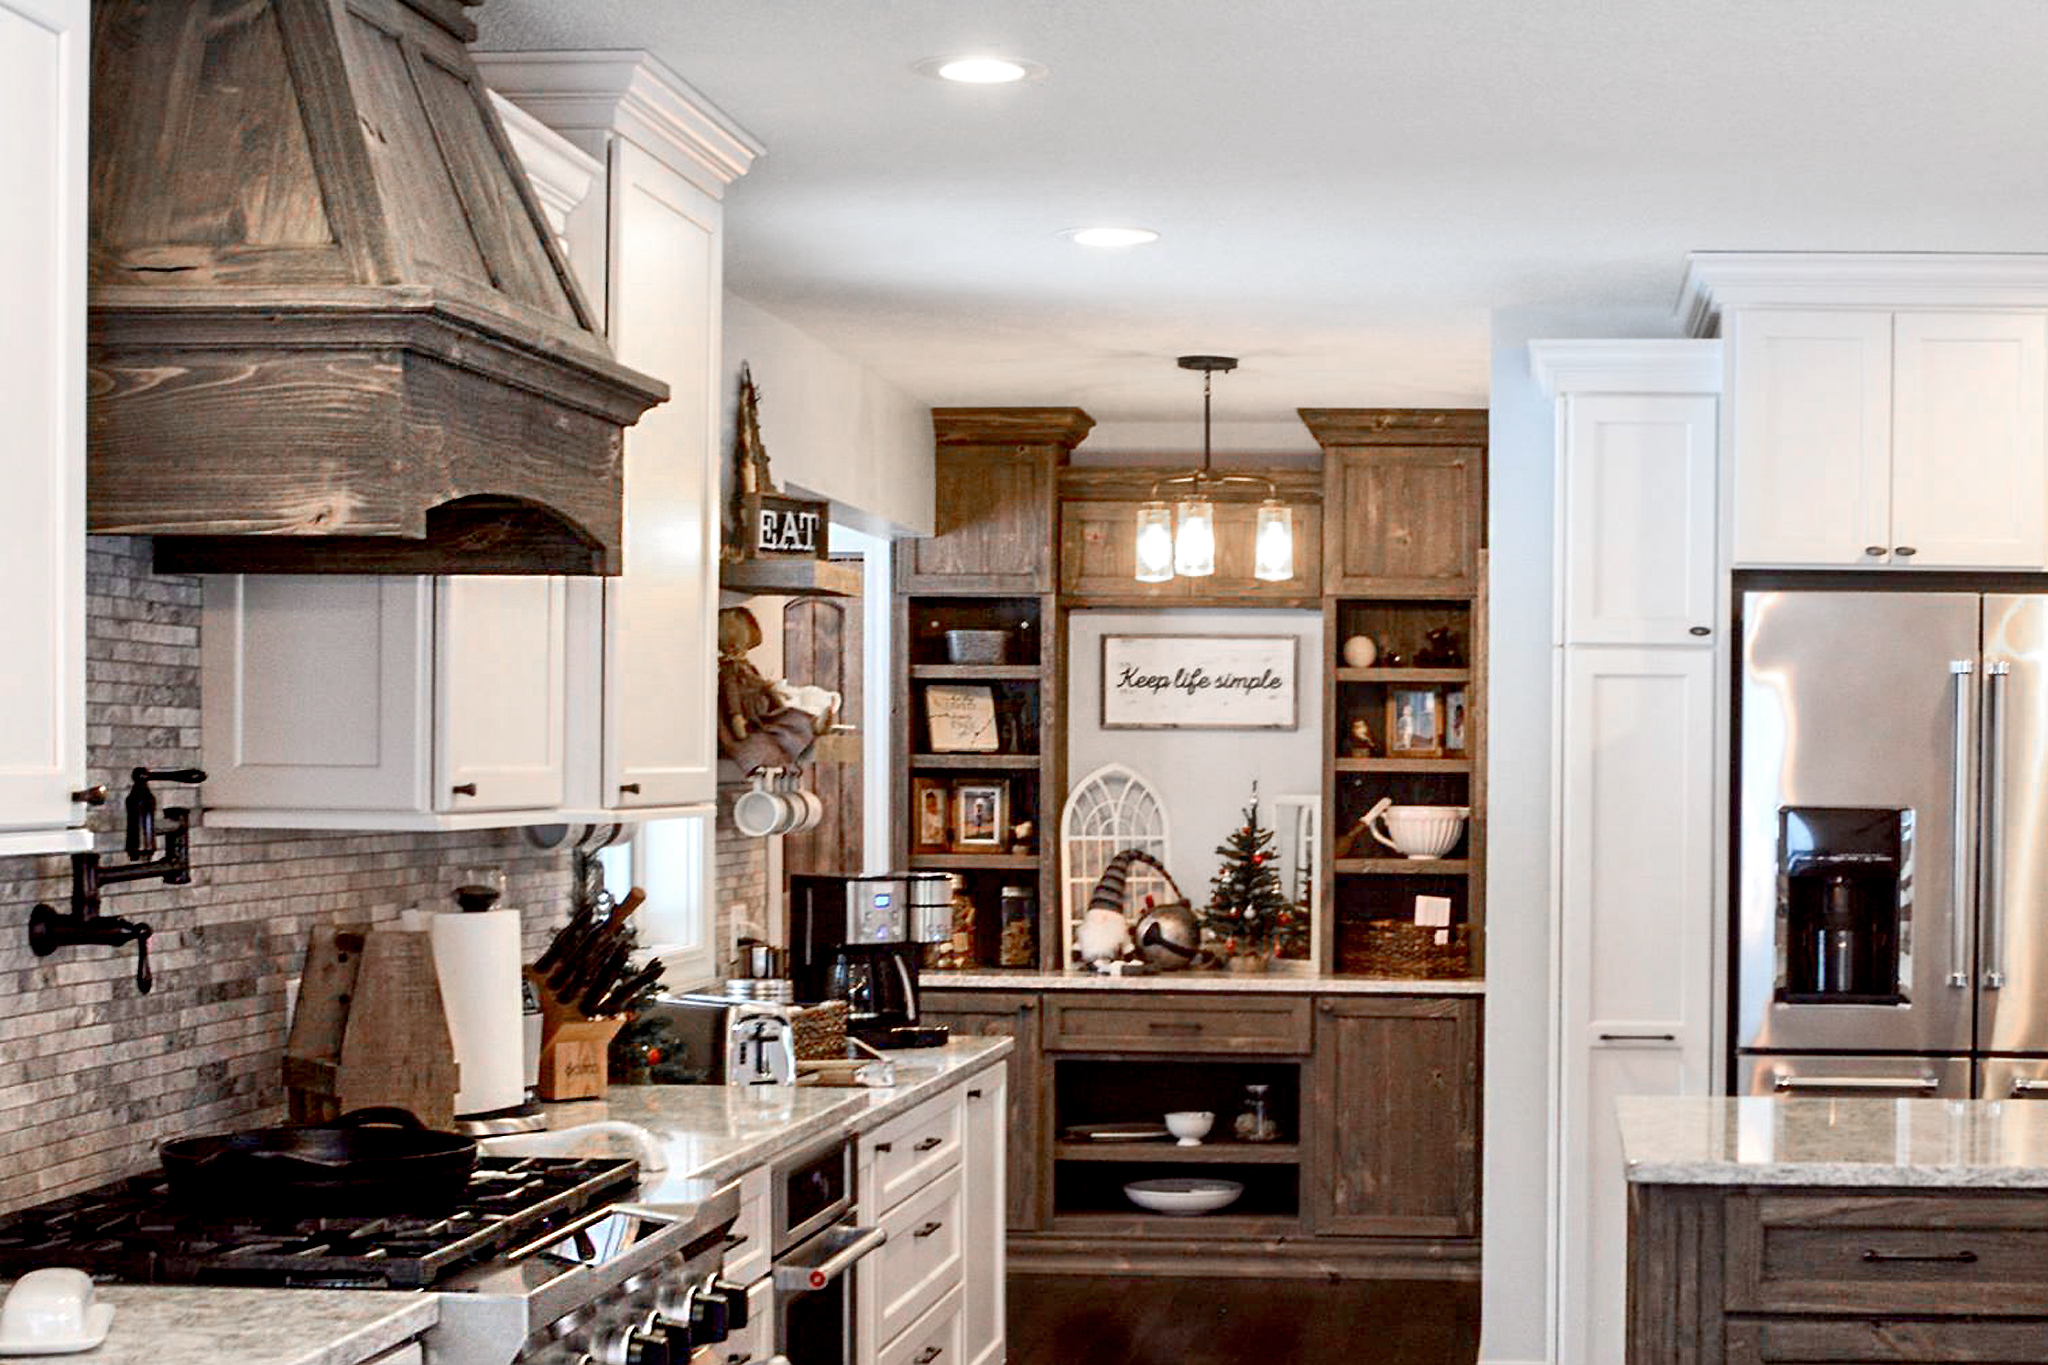 The best quality cabinet! Hear this kitchen remodel story about their new white painted and rustic weathered wood cabinetry.